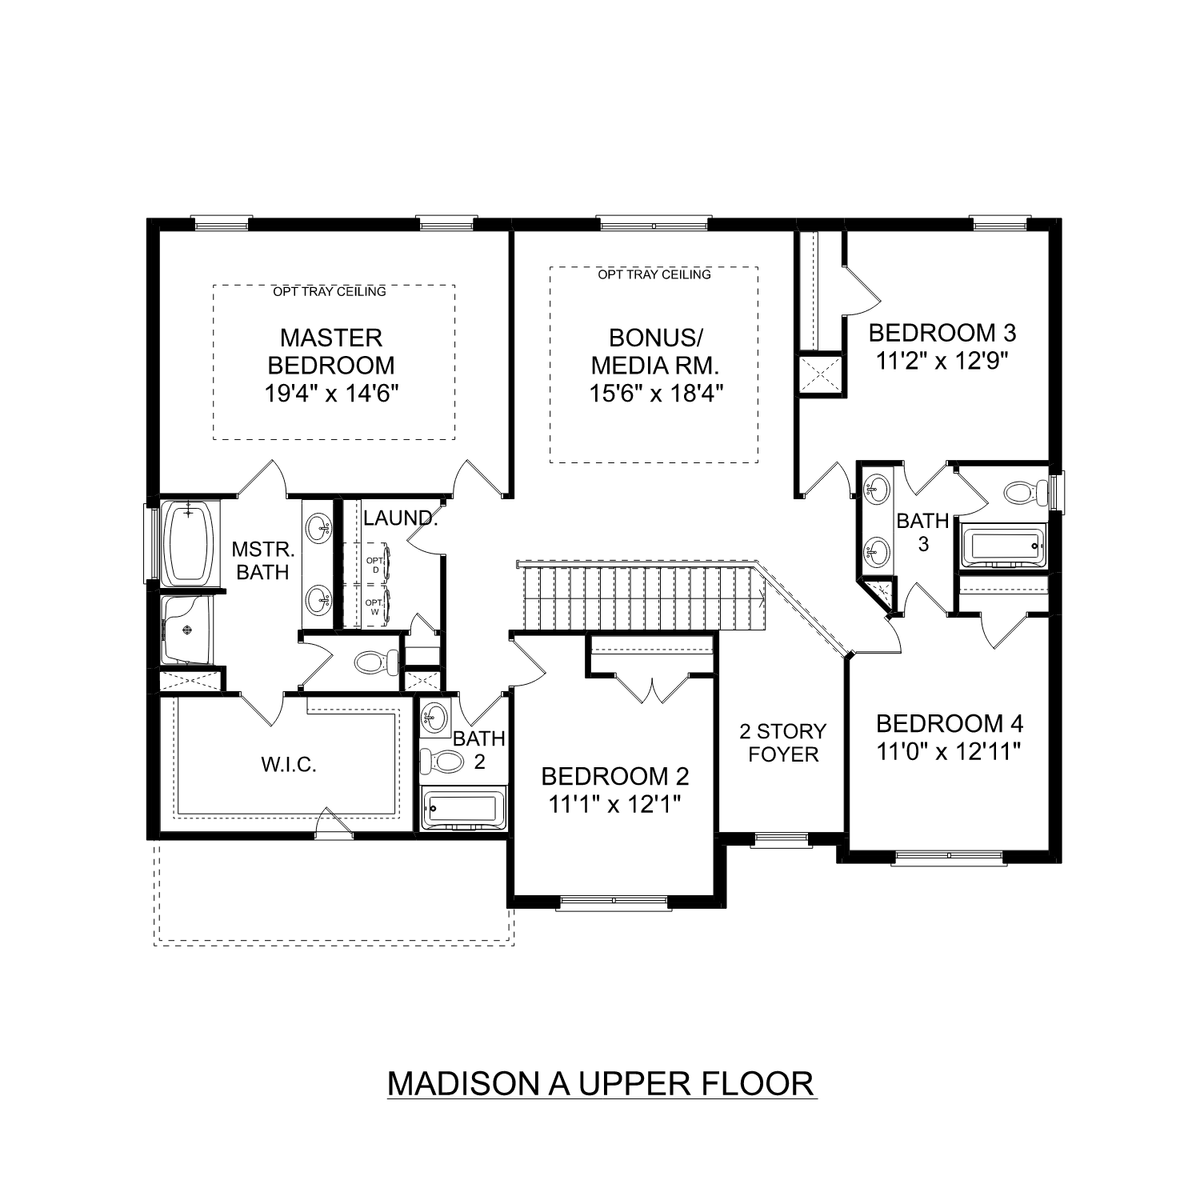 2 - The Madison A buildable floor plan layout in Davidson Homes' River Road Estates community.